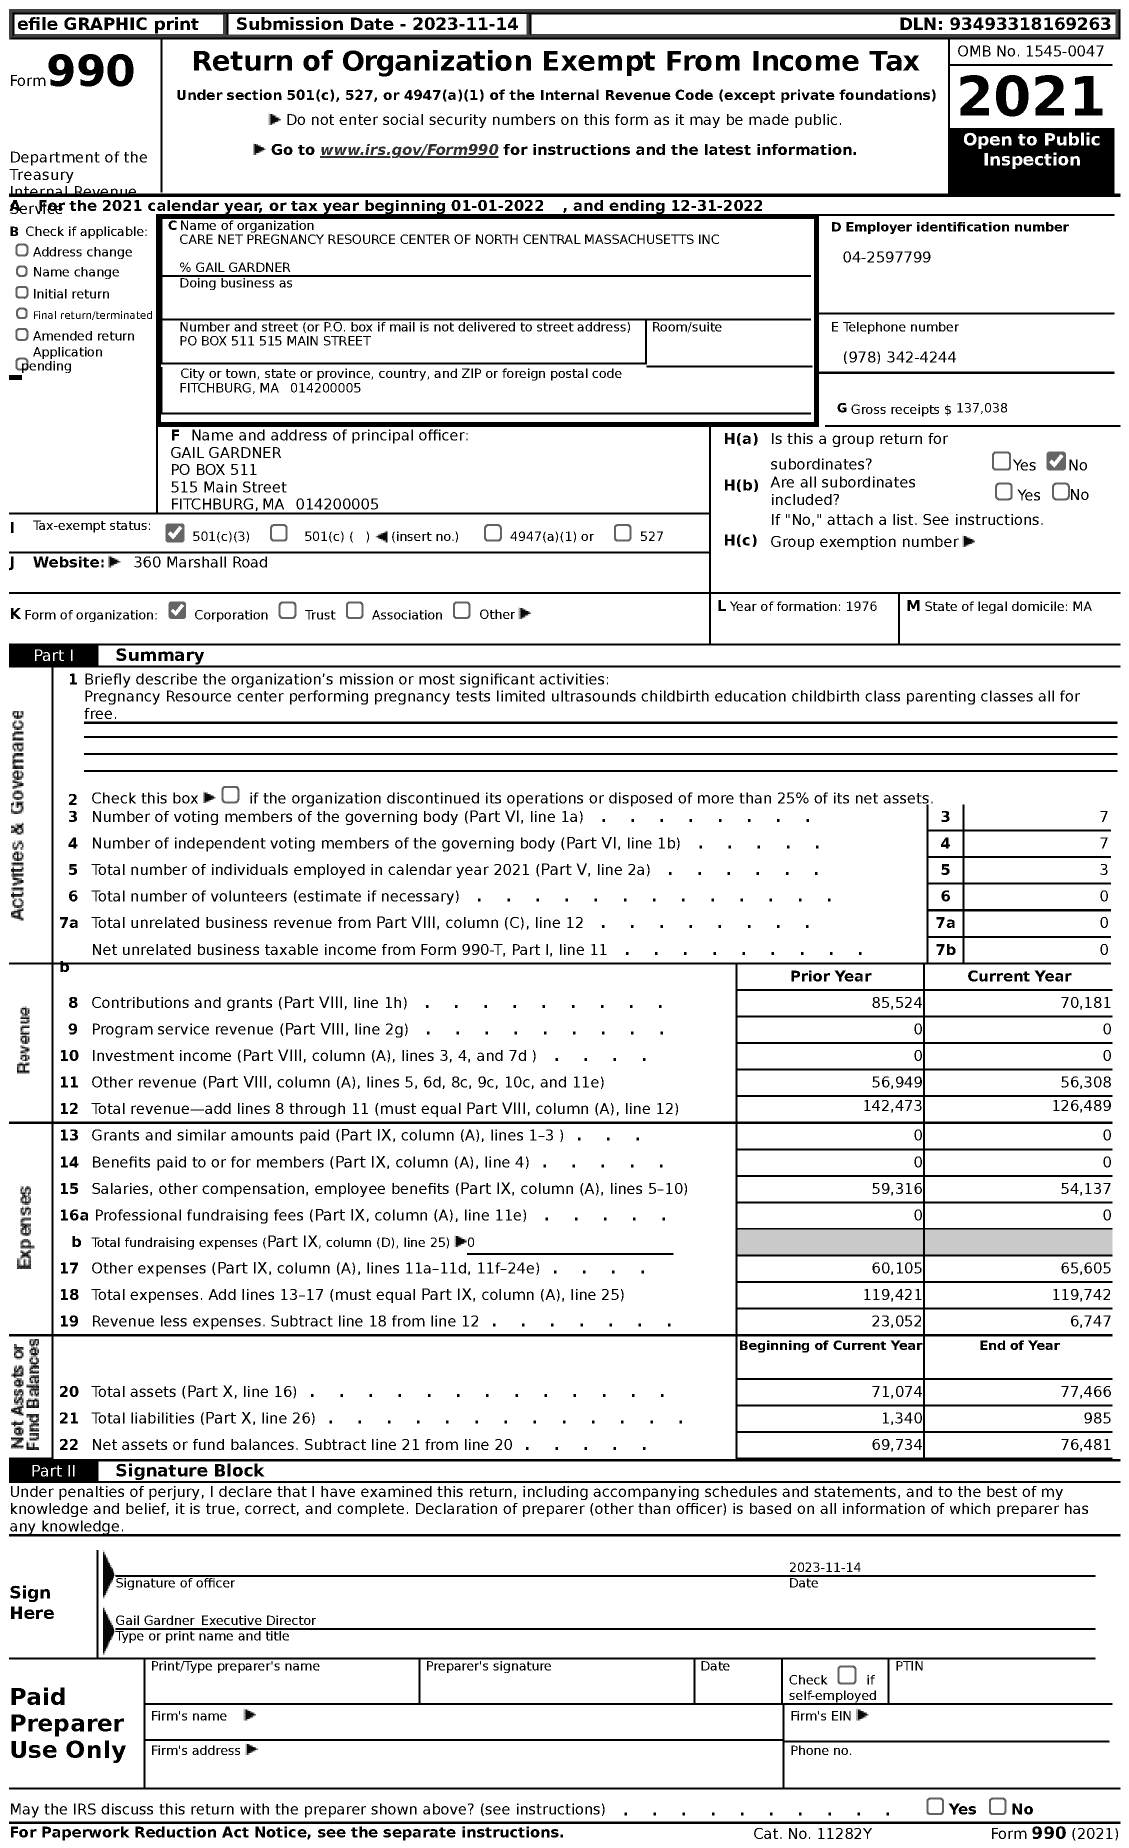 Image of first page of 2022 Form 990 for Carenet Net Pregnancy Resource Center of North Central Massachusetts